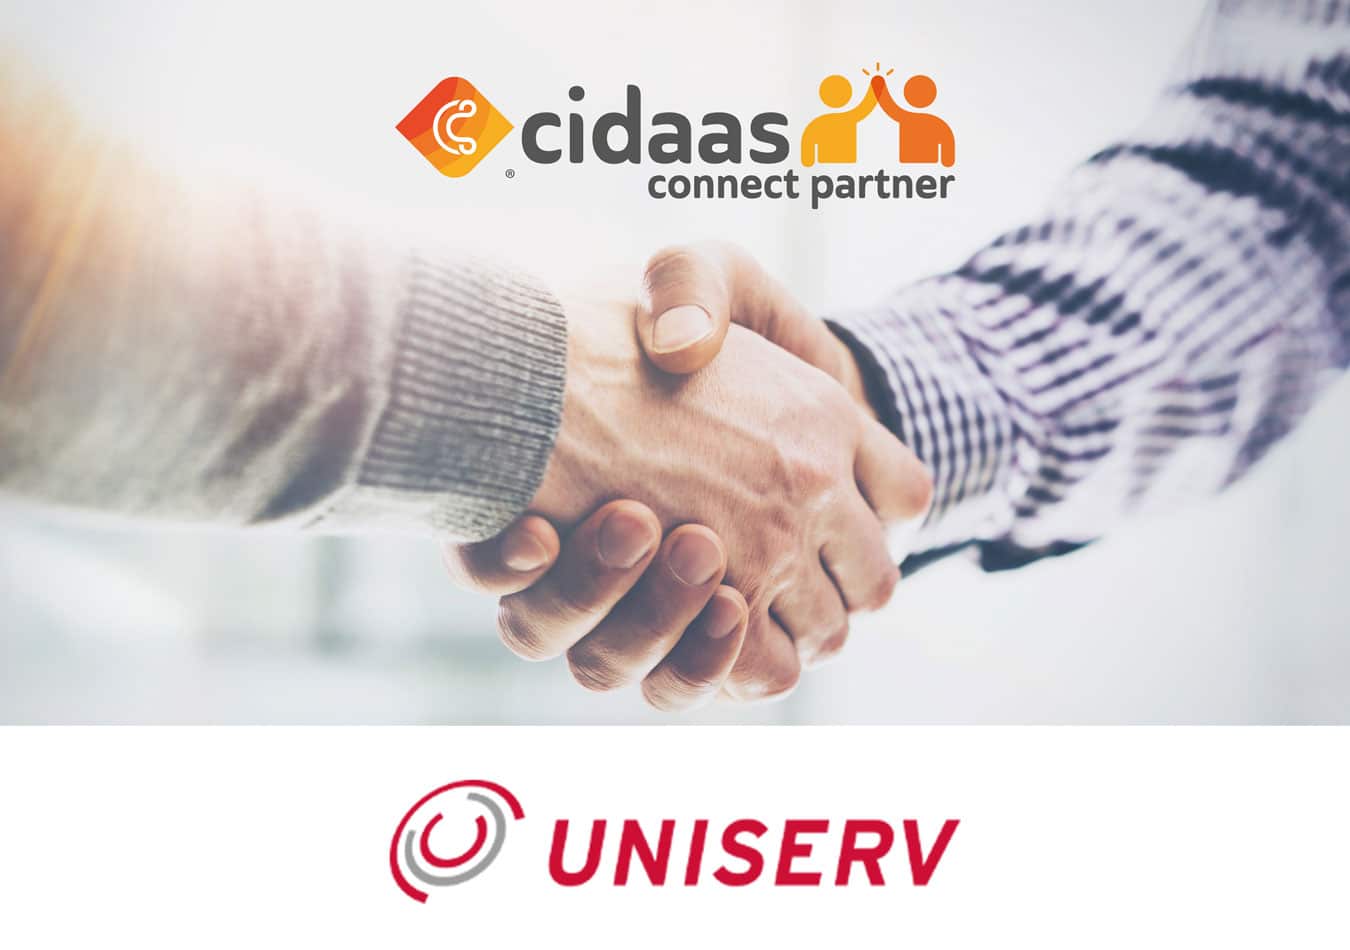 Together we can achieve more! - Uniserv and cidaas enter into a technology partnership